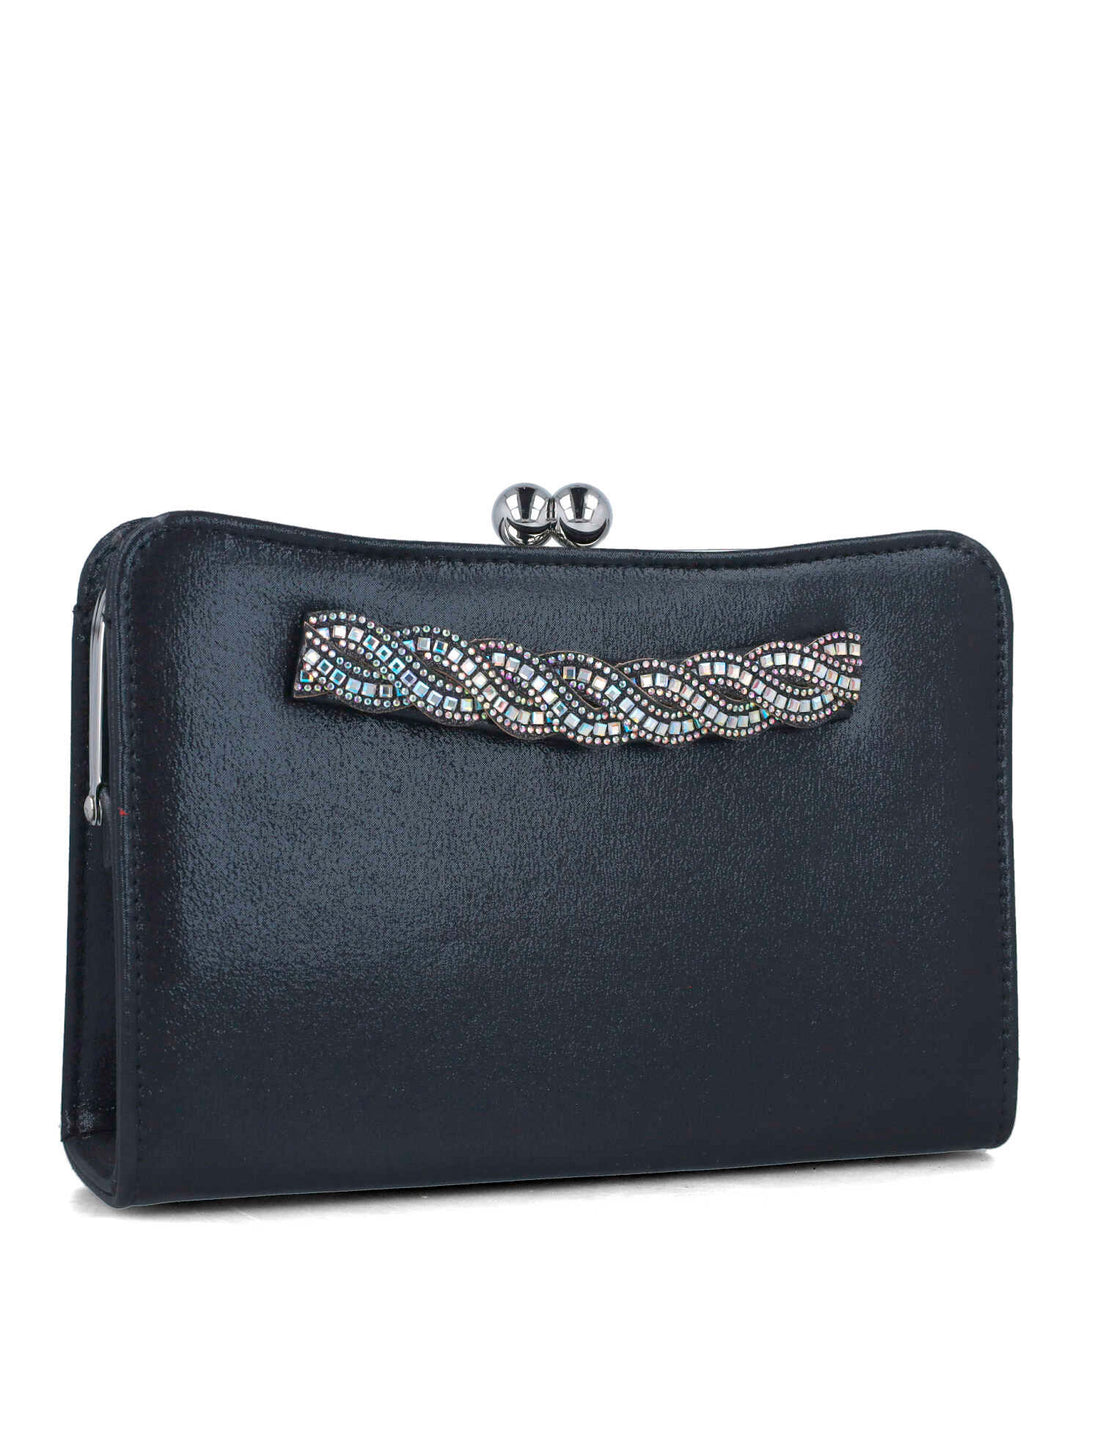 Black Clutch With Embellished Hand Strap_85490_01_02